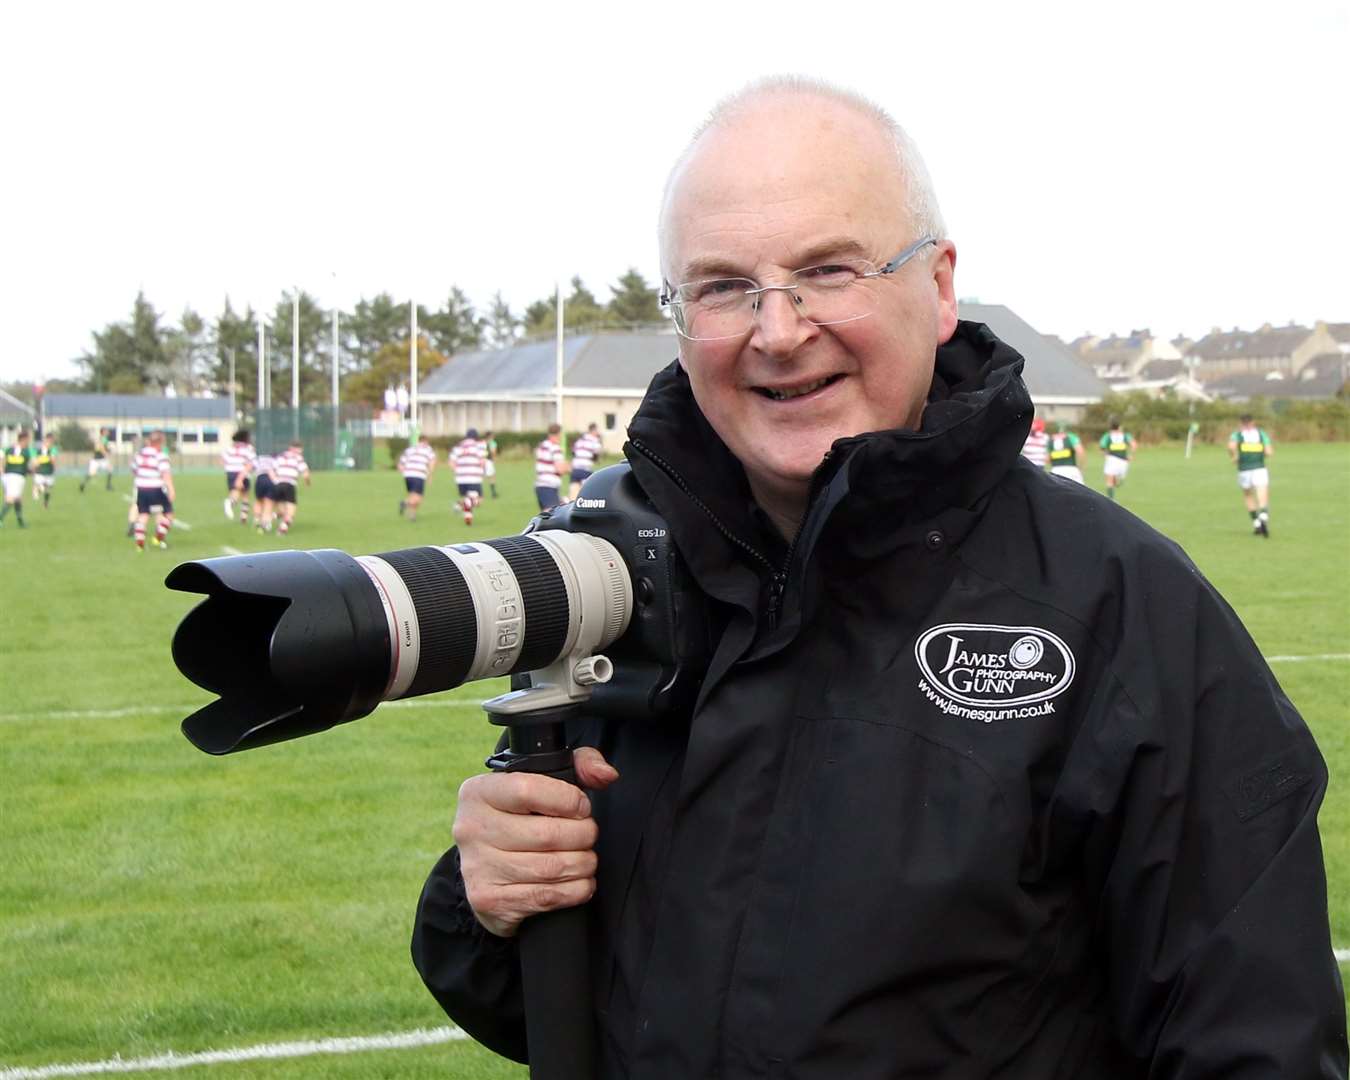 James at the Millbank rugby ground in Thurso to cover a Caithness home game.